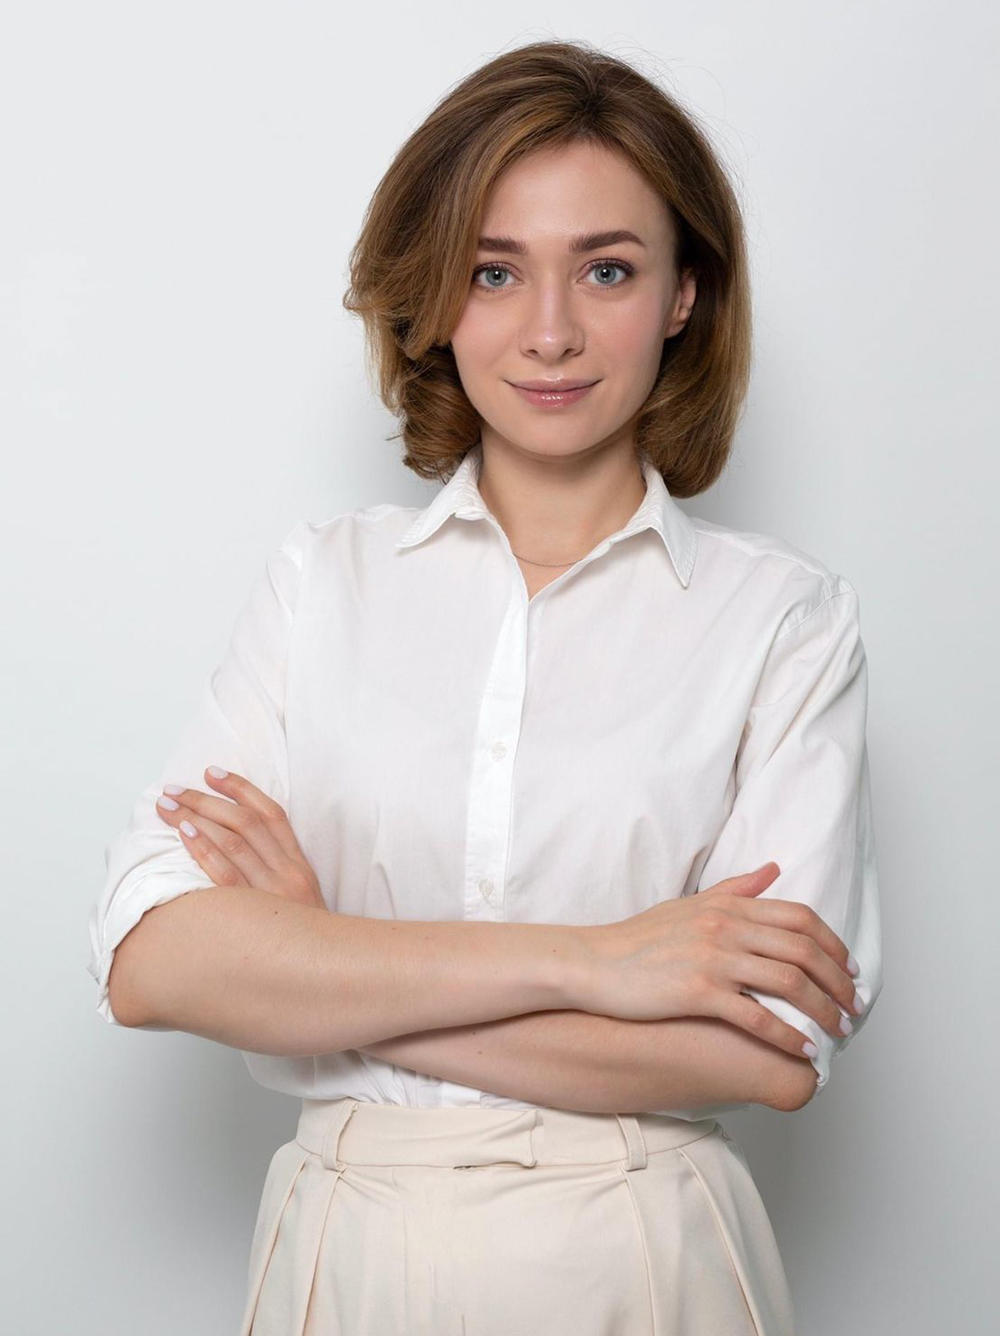 Until the war broke out, neurologist Aleksandra Shchebet ran a private practice in Kyiv. She helped treat chronic headaches and back pain and also practiced as a psychotherapist. Now she routinely consults with individuals experiencing chronic headaches and chronic pain stemming from inadequate or absent treatment over the last few months.